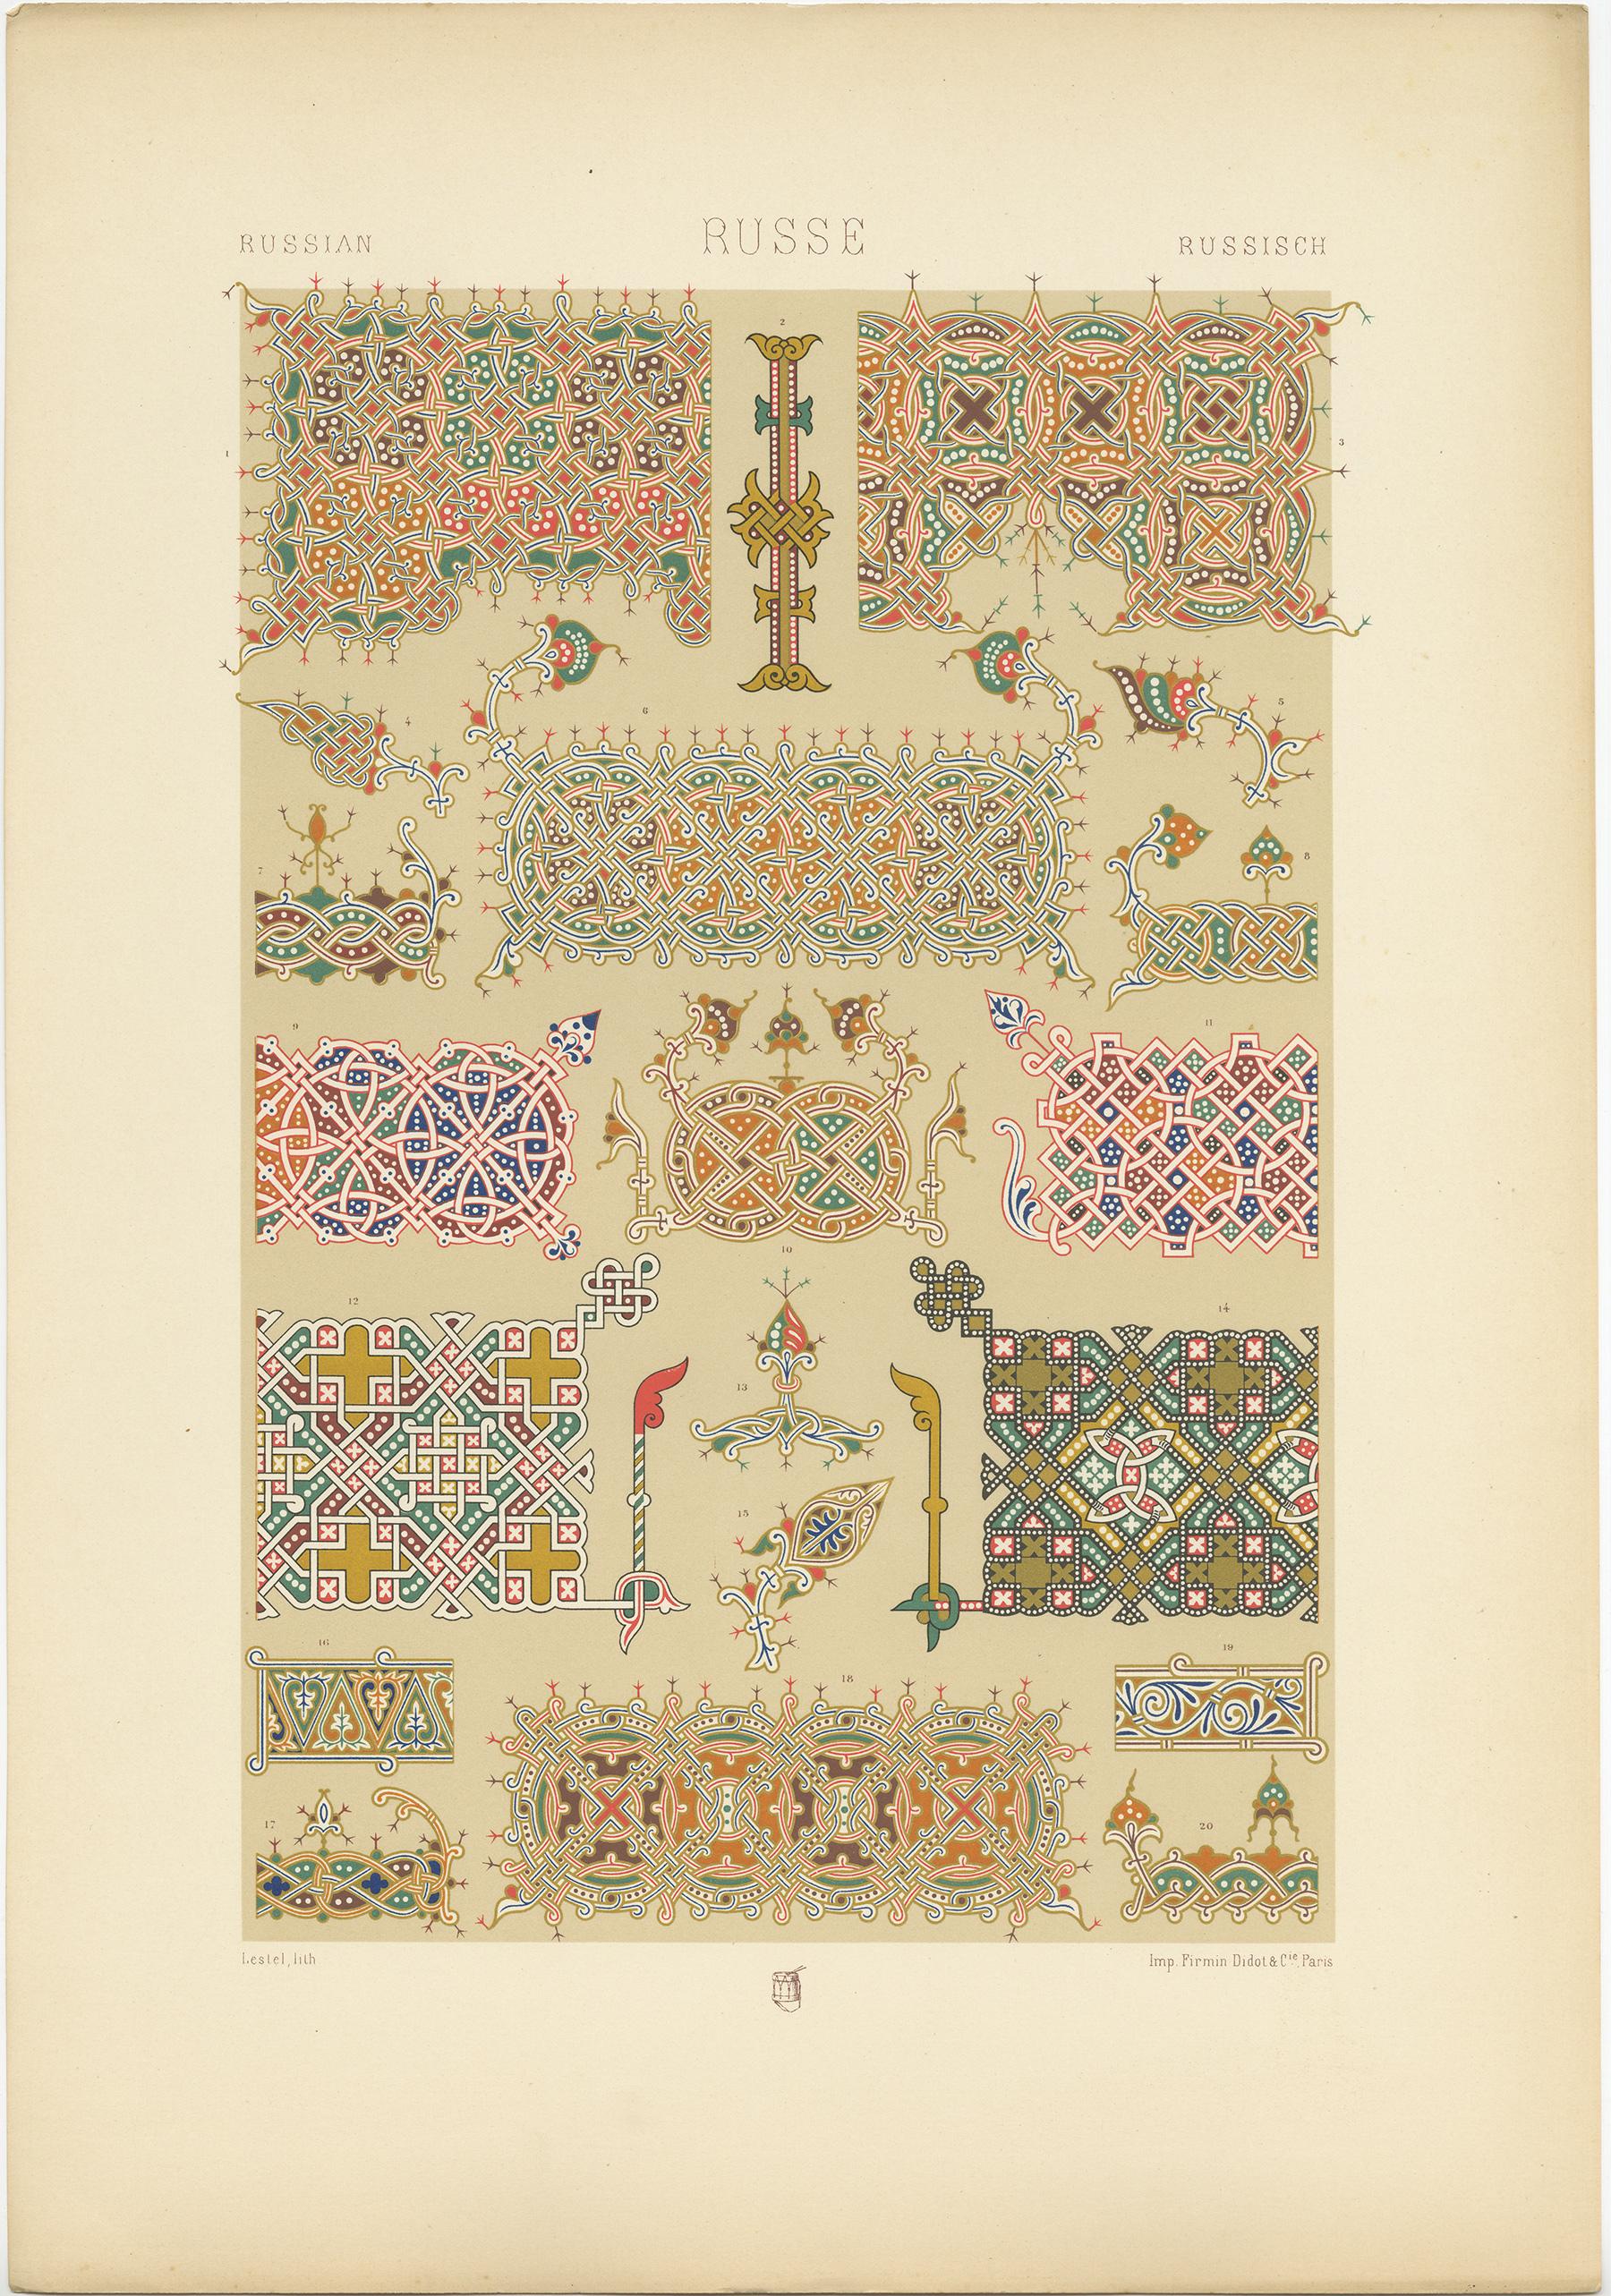 Antique print titled 'Russian - Russe - Russische'. Chromolithograph of interlace and other ornaments from 16th century manuscripts ornaments. This print originates from 'l'Ornement Polychrome' by Auguste Racinet. Published, circa 1890.